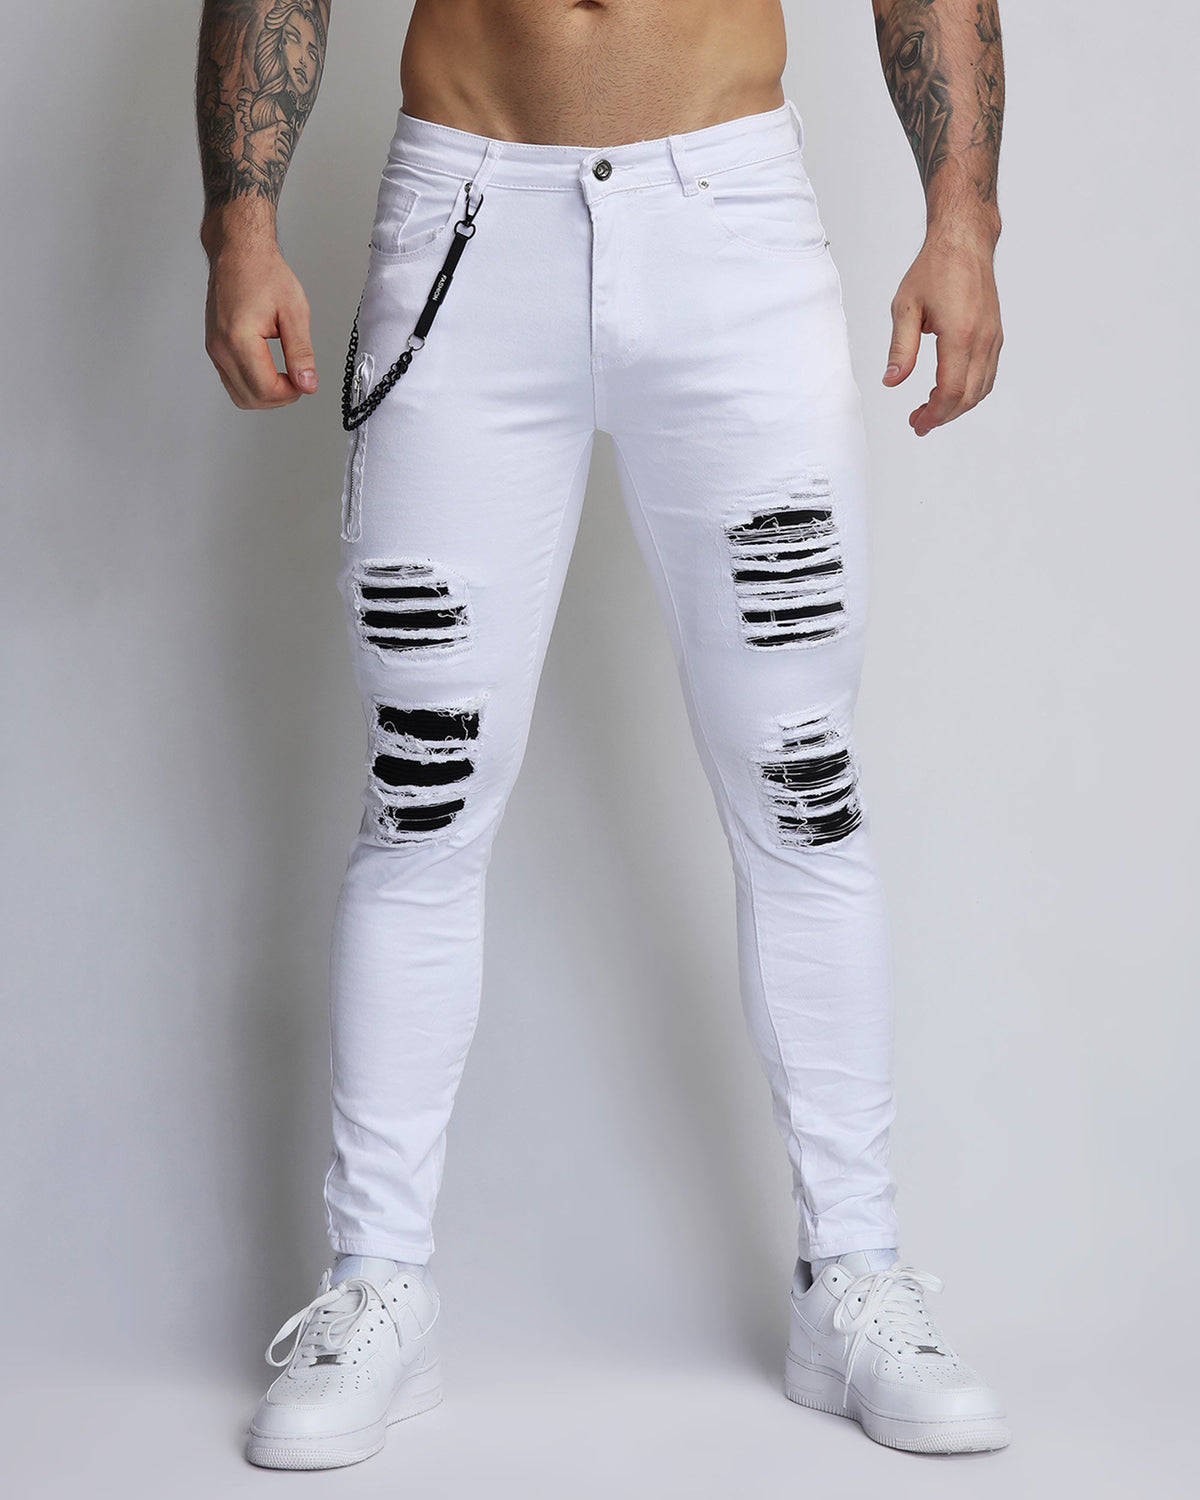 Large Ripped White Jeans with Black Patches